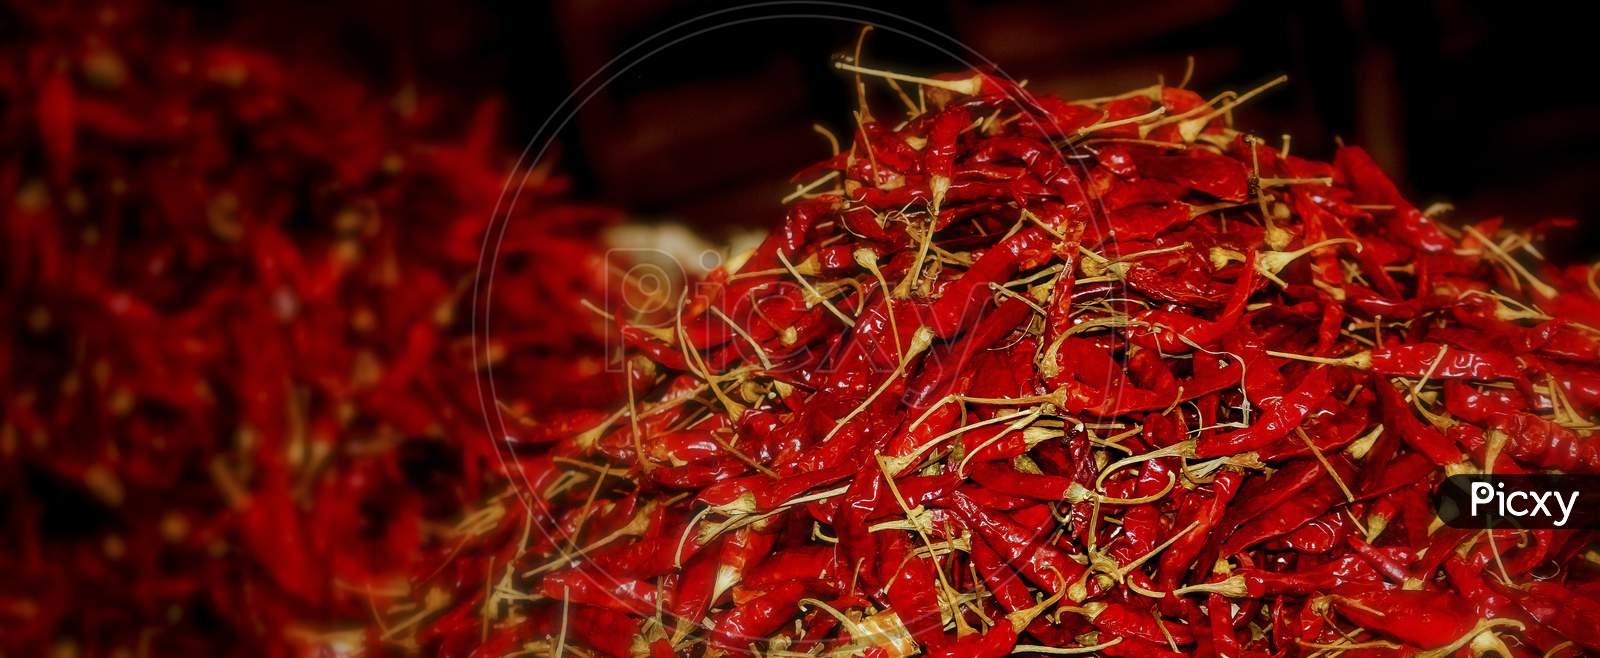 Close Up Of Red Dried Chili Flakes Food Background